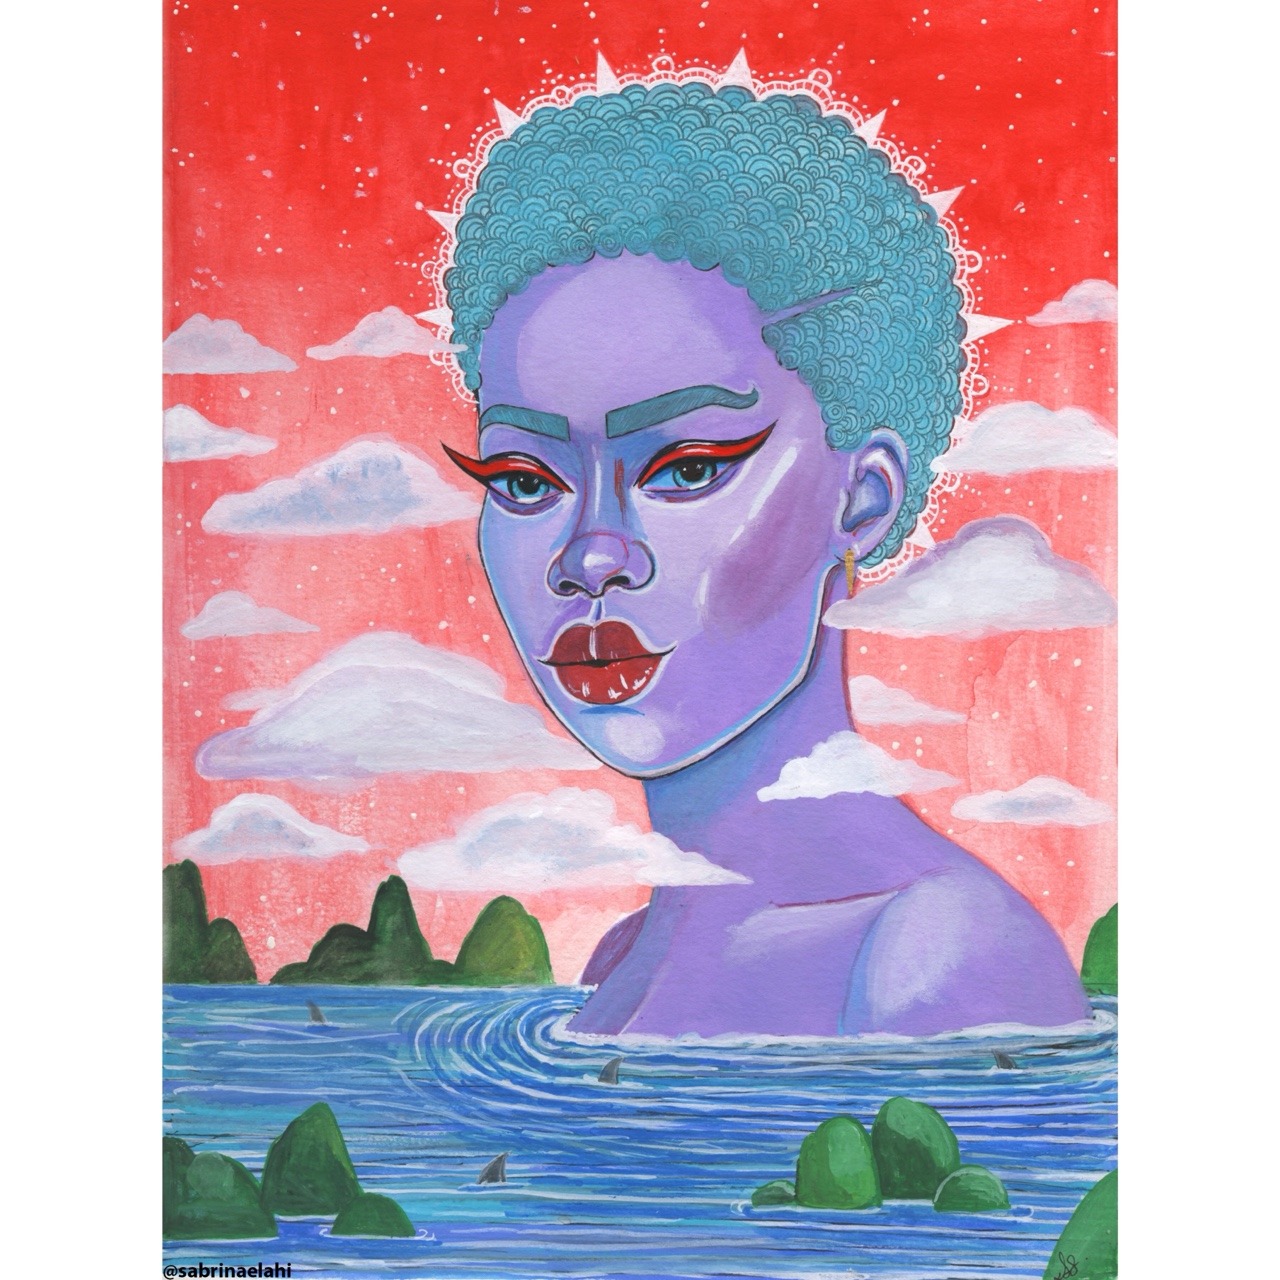 My painting titled Aja Insta: sabrinaelahi was — Immediately post your art to a topic and get feedback. Join our new community, EatSleepDraw Studio, today!